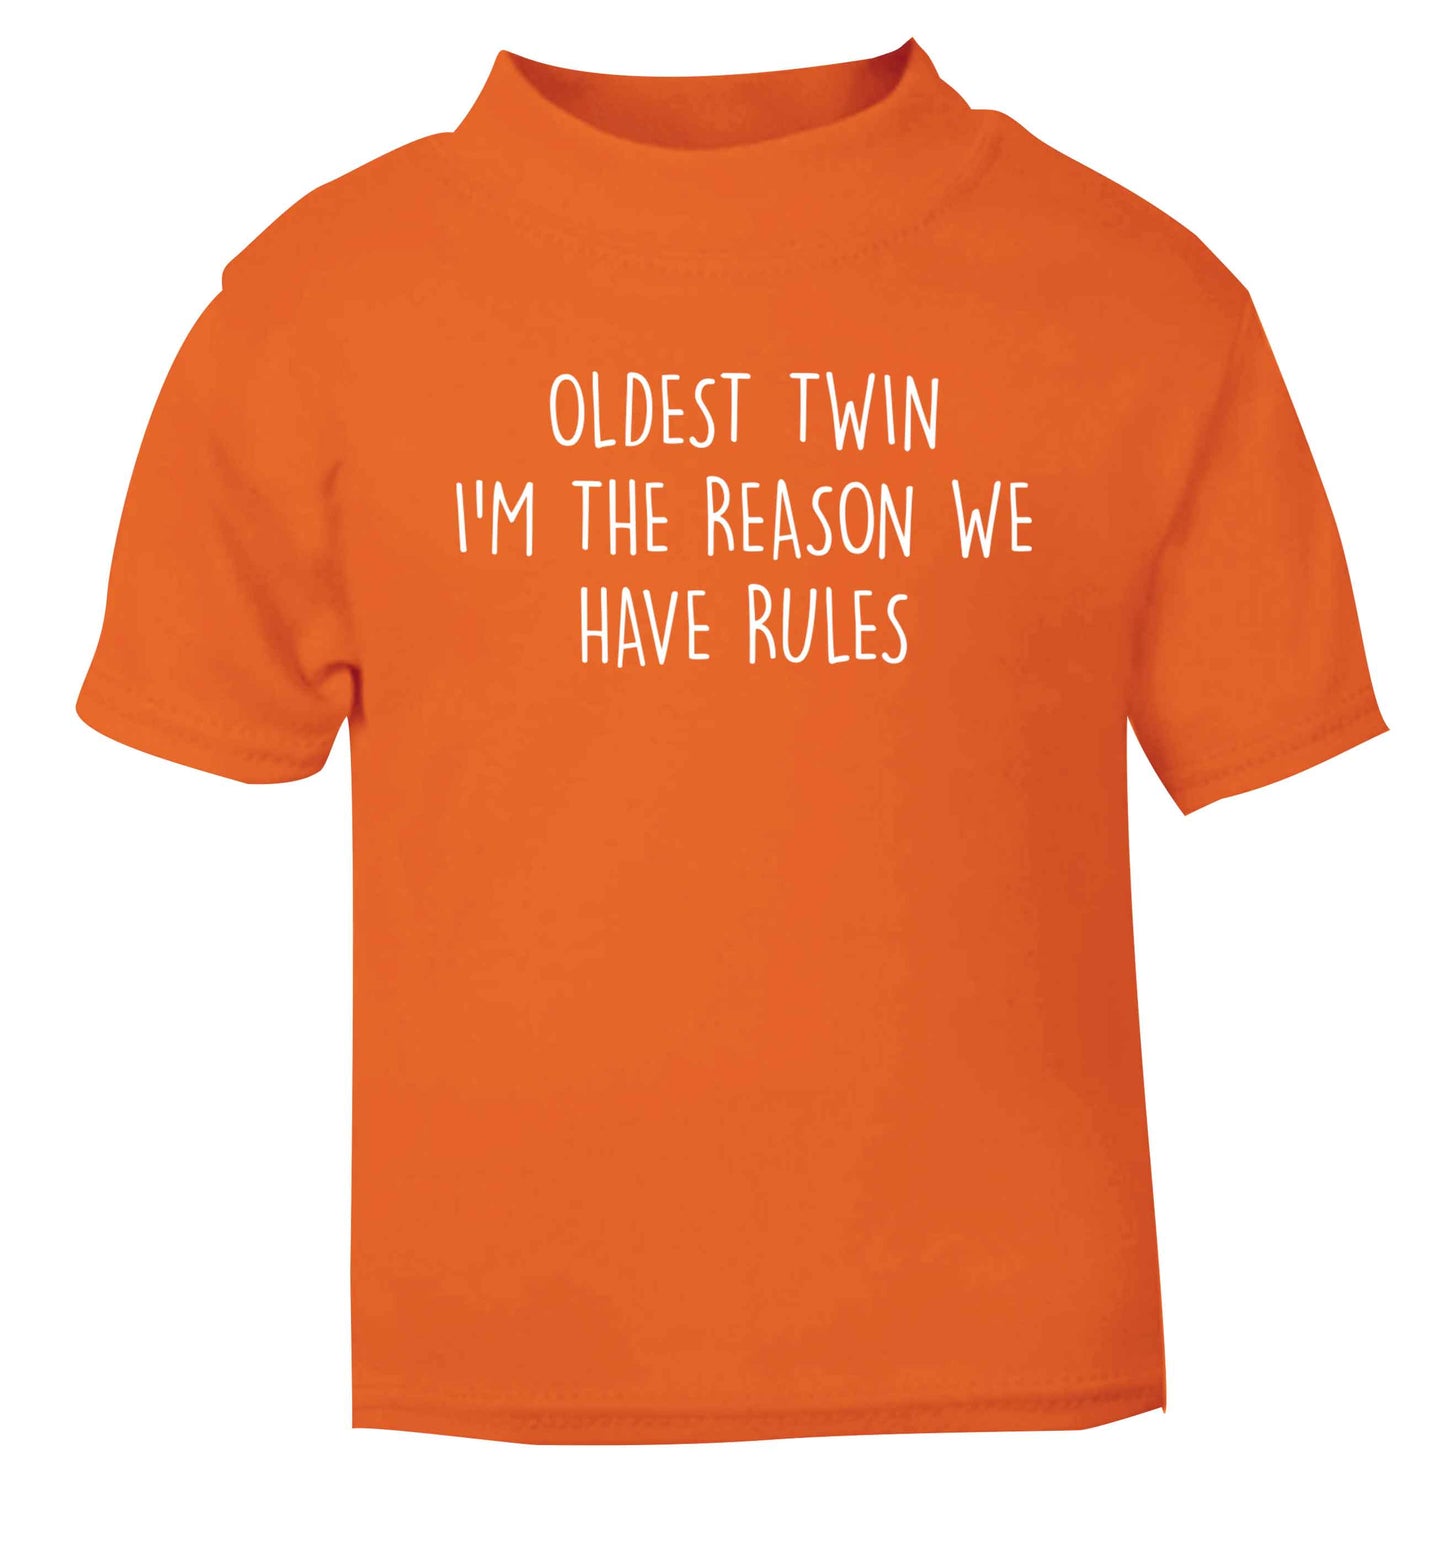 Oldest twin I'm the reason we have rules orange baby toddler Tshirt 2 Years